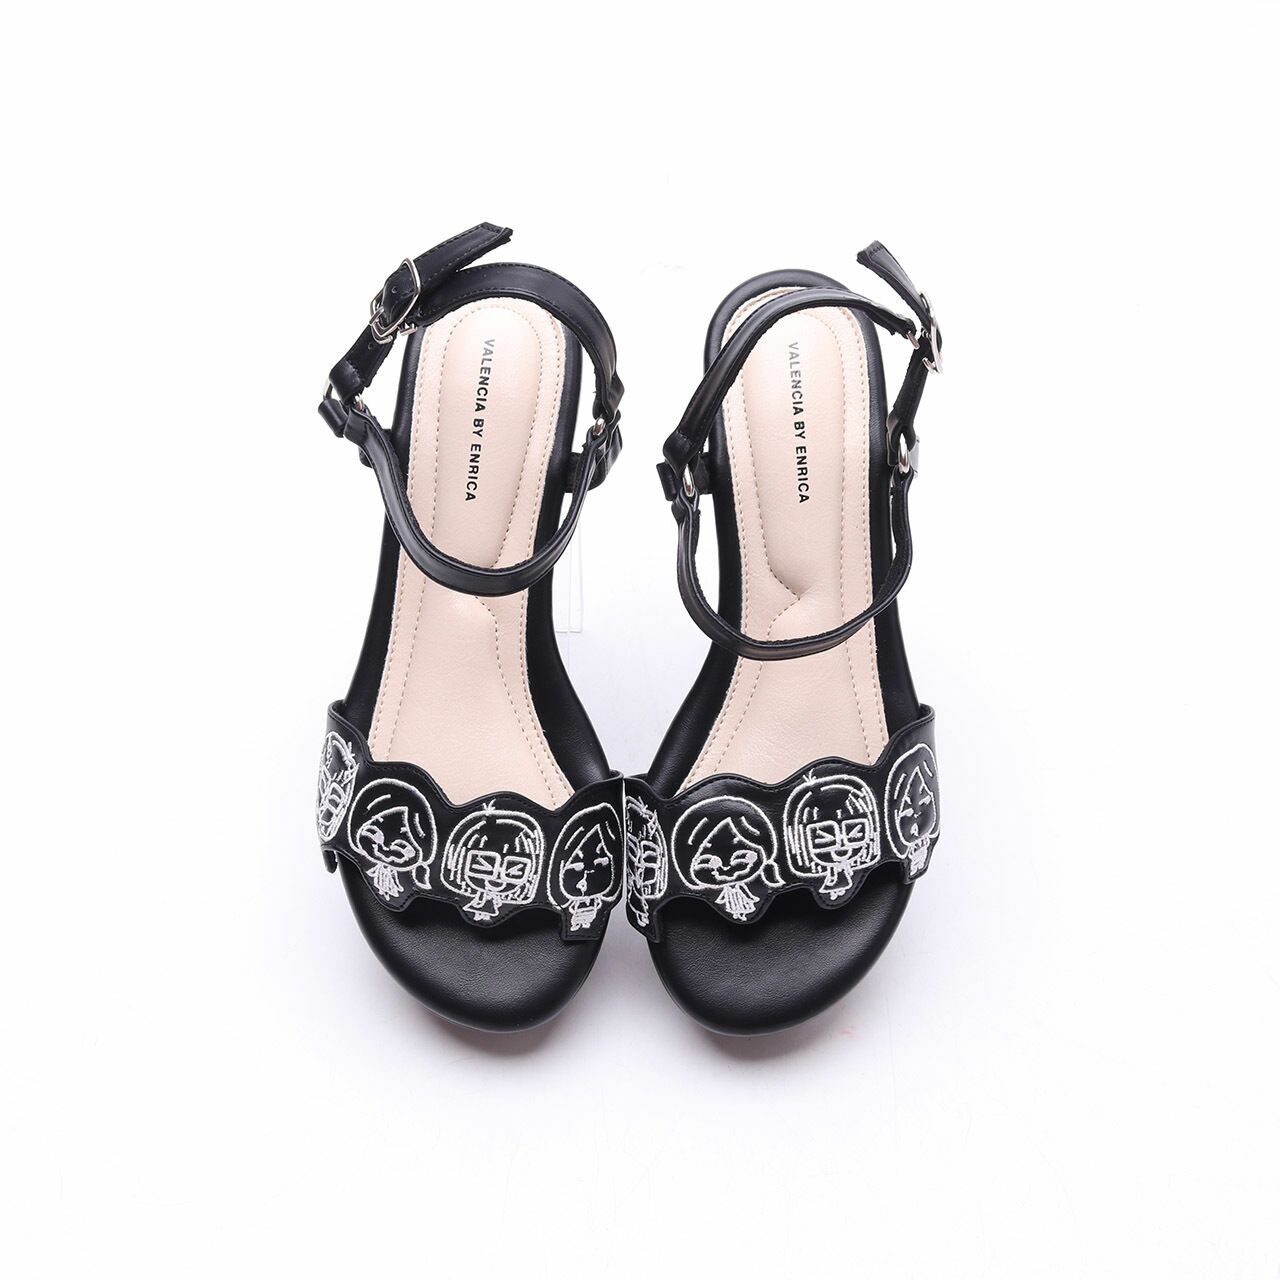 Valencia By Enrica Bubbly Wedges In Pebble Black